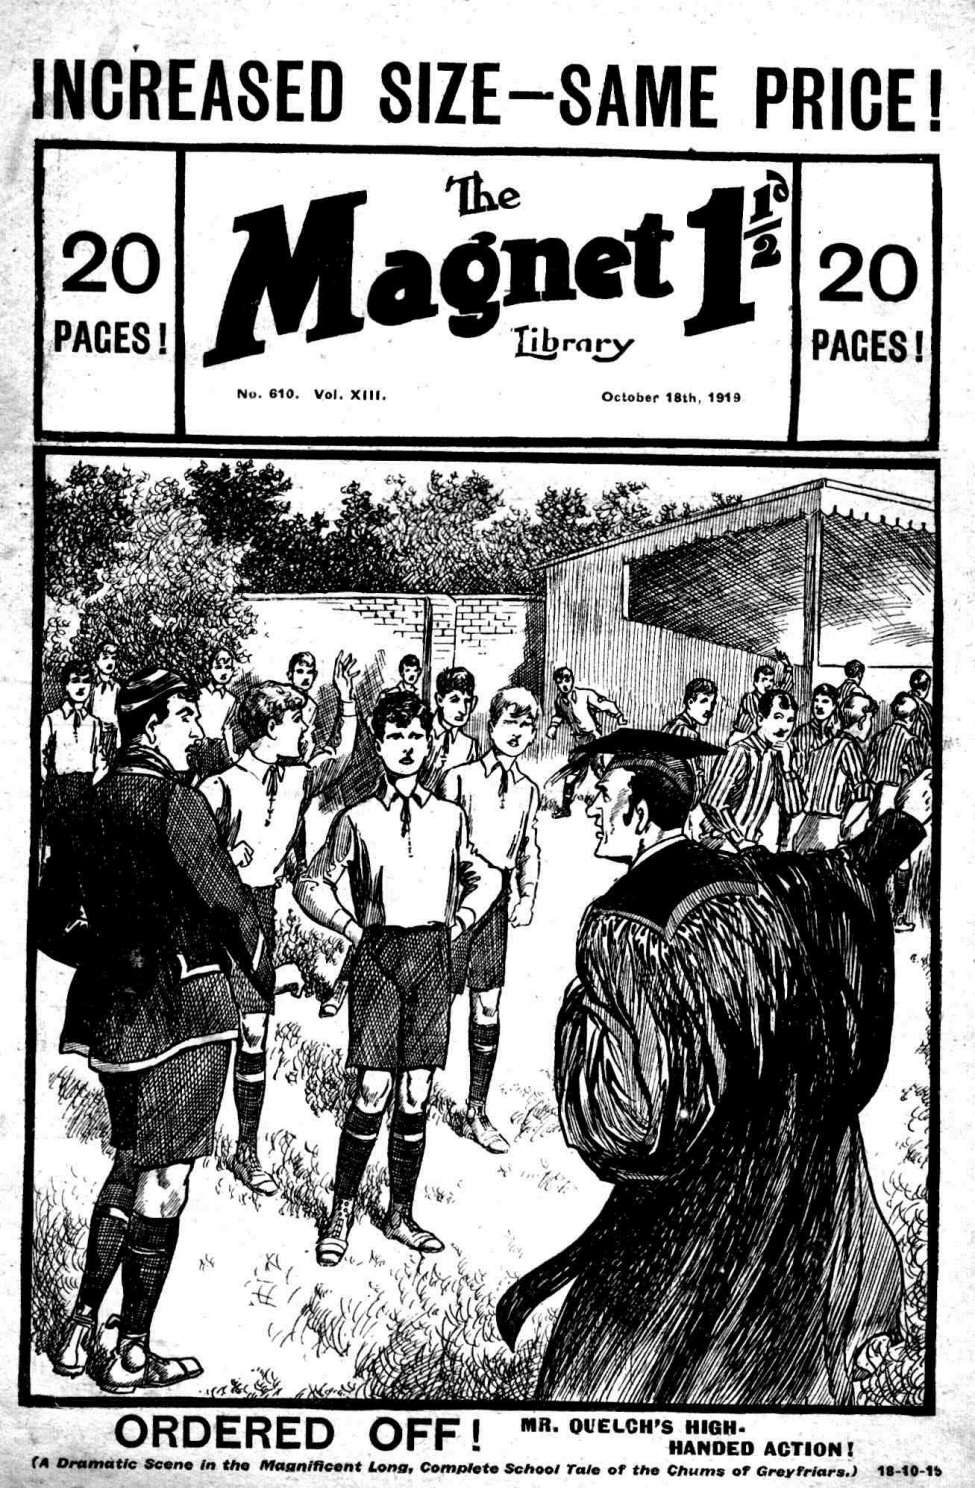 Book Cover For The Magnet 610 - The Mystery of Mr. Quelch